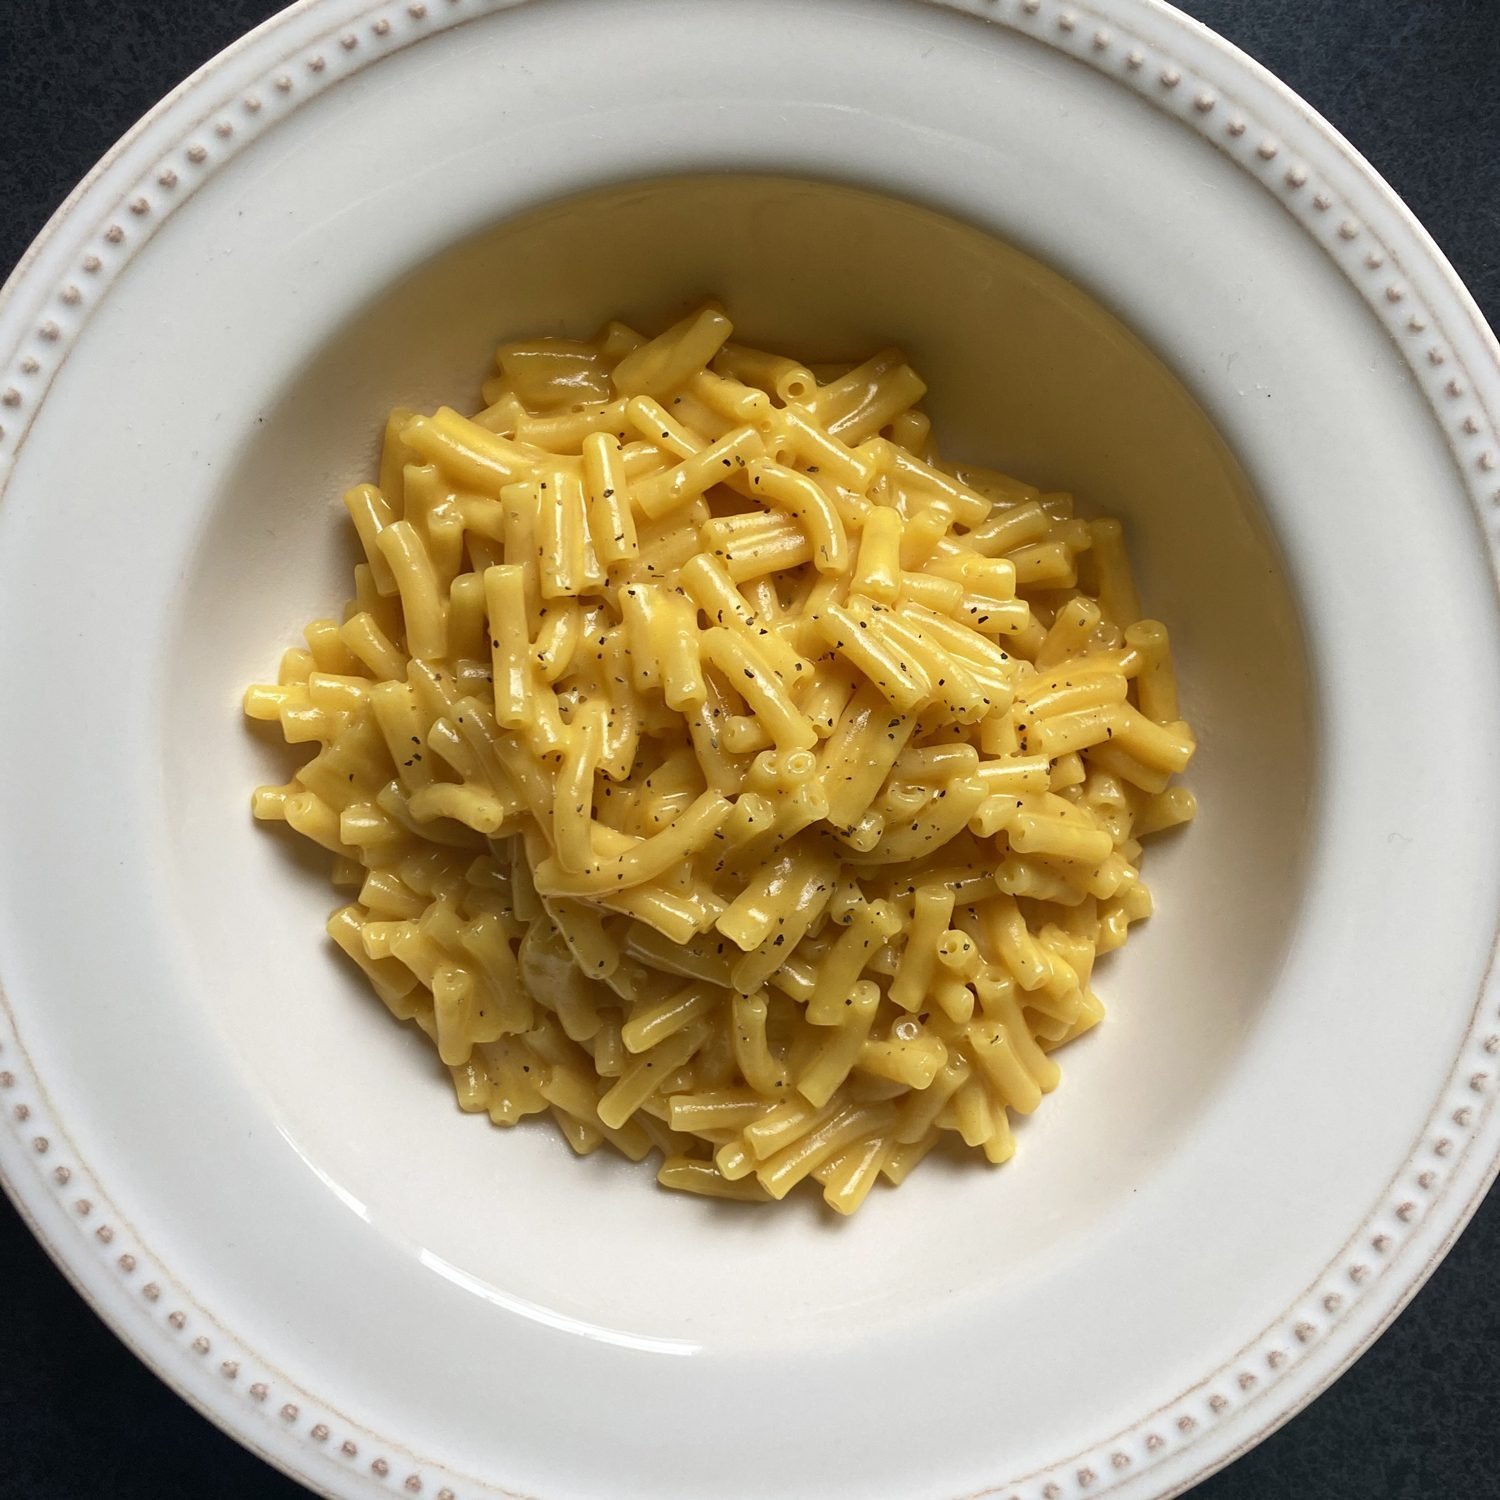 https://www.rd.com/wp-content/uploads/2021/09/tik-tok-mac-and-cheese01_Hannah-Twietmeyer-for-Taste-of-Home.jpg?fit=700%2C1024